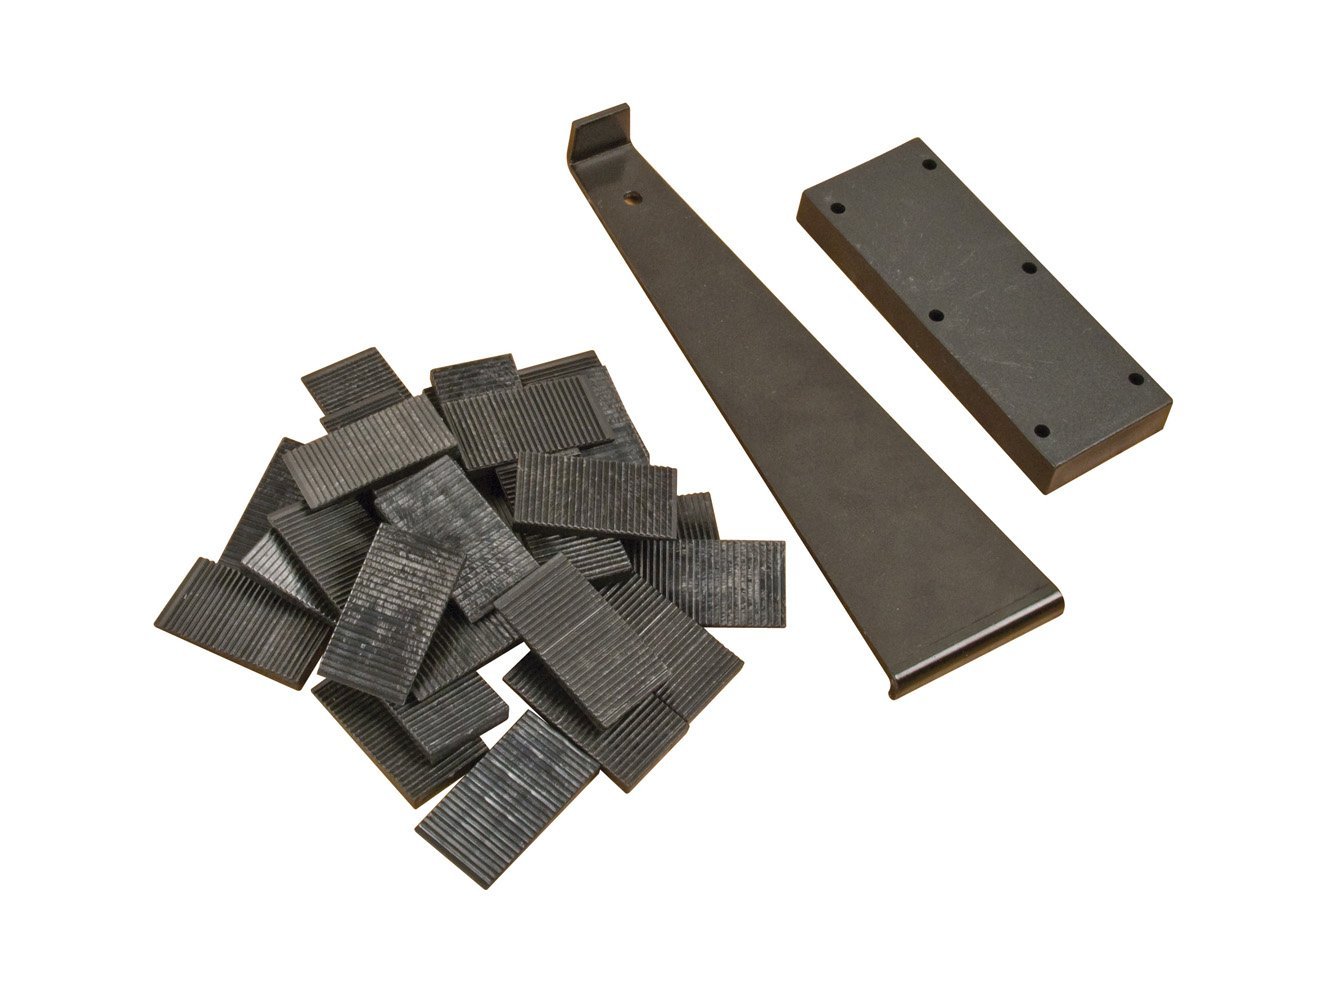 10-26 Tongue and Groove Flooring Installation Kit by QEP